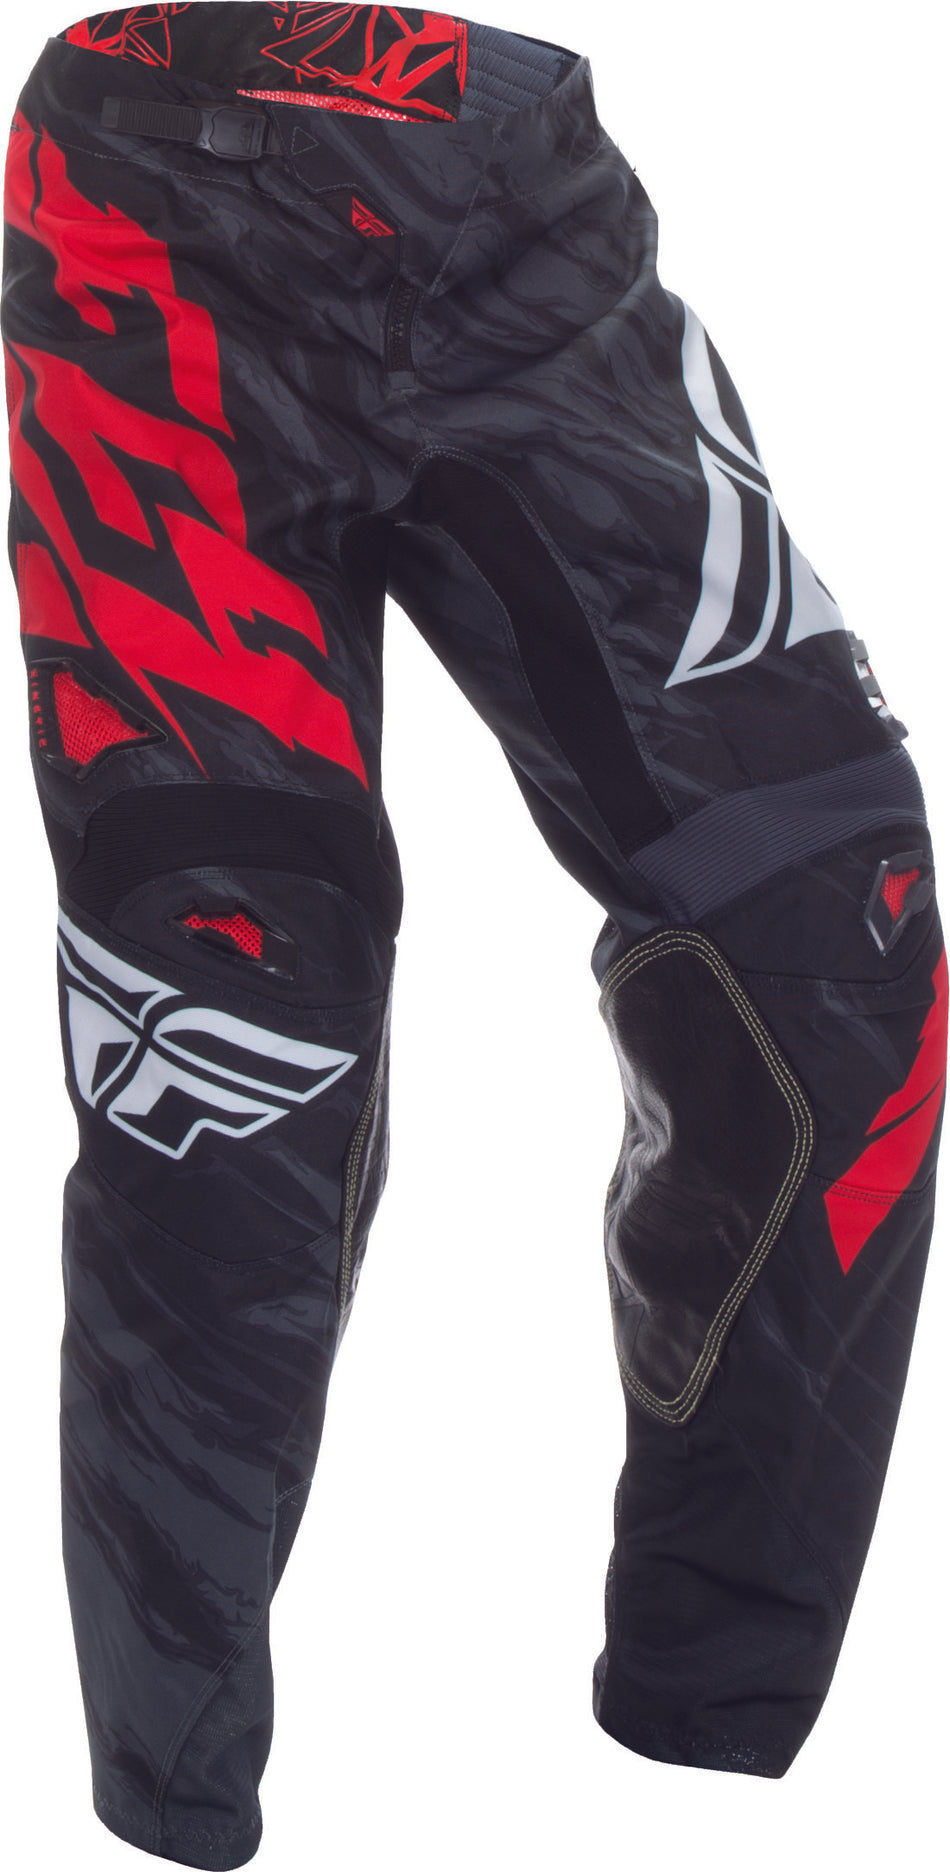 FLY RACING Kinetic Relapse Pant Black/Red Sz 40 370-43040